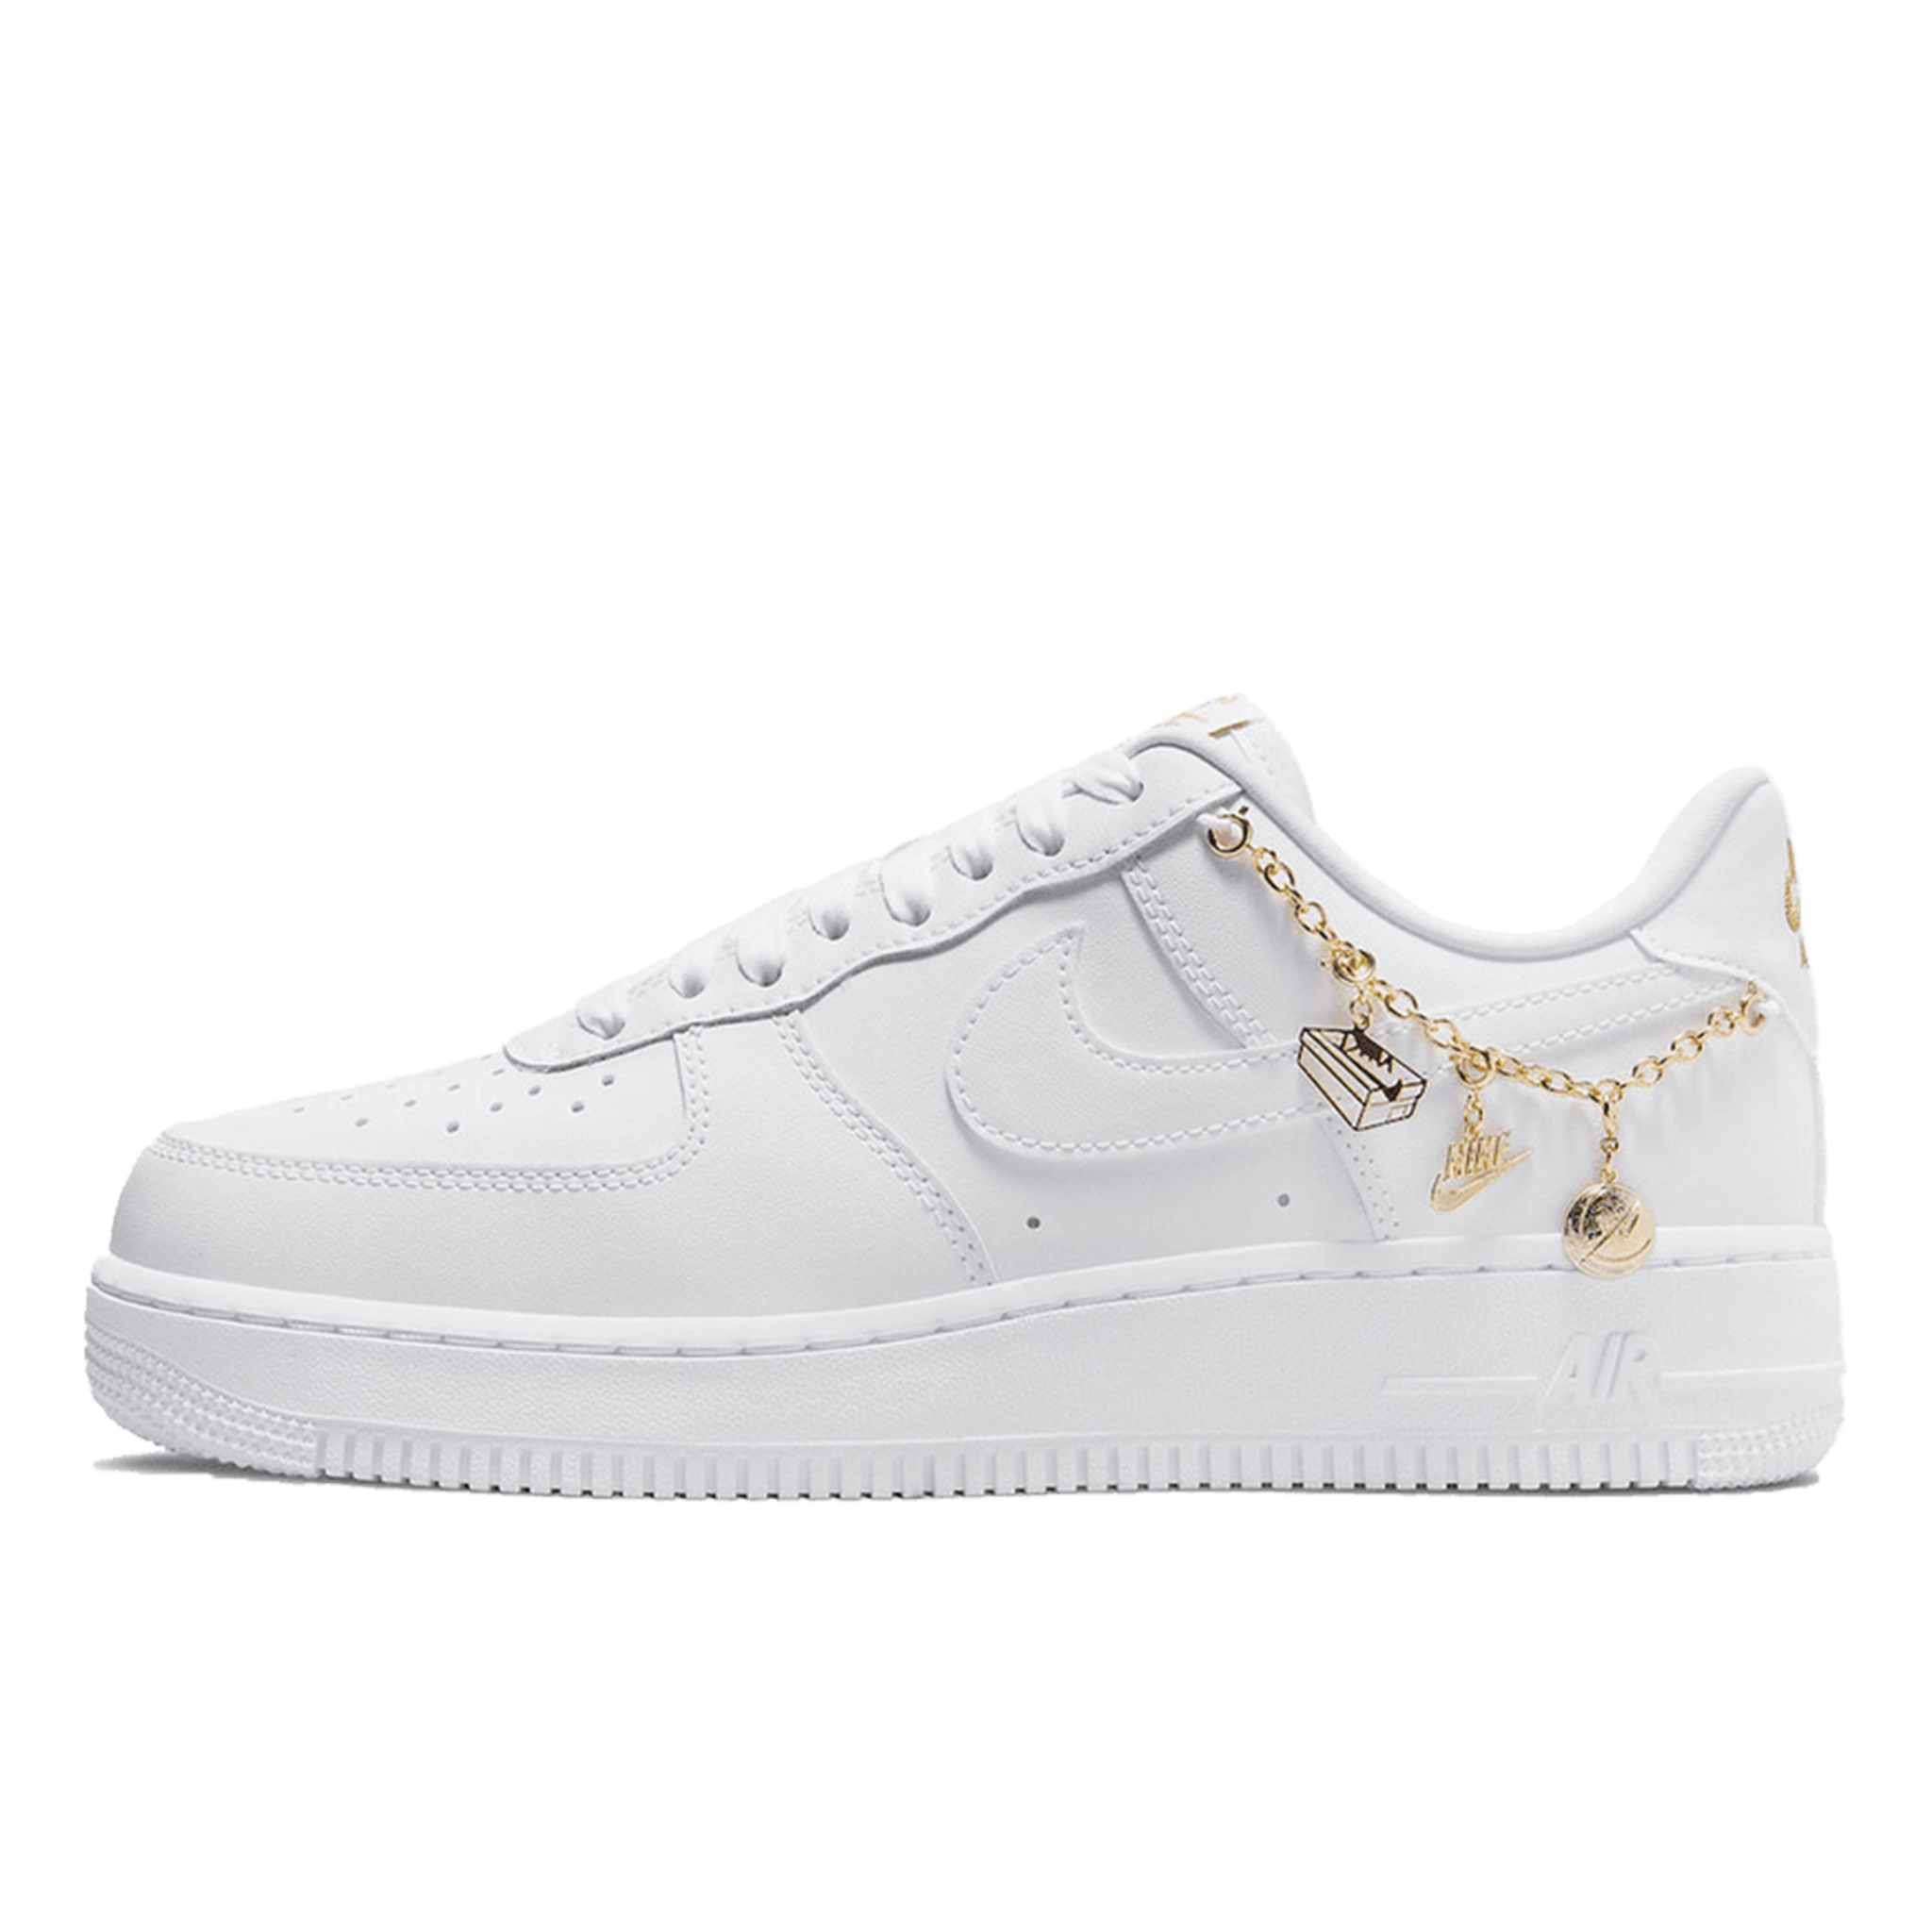 Nike Air Force 1 Low LX "Lucky Charms White" (W)